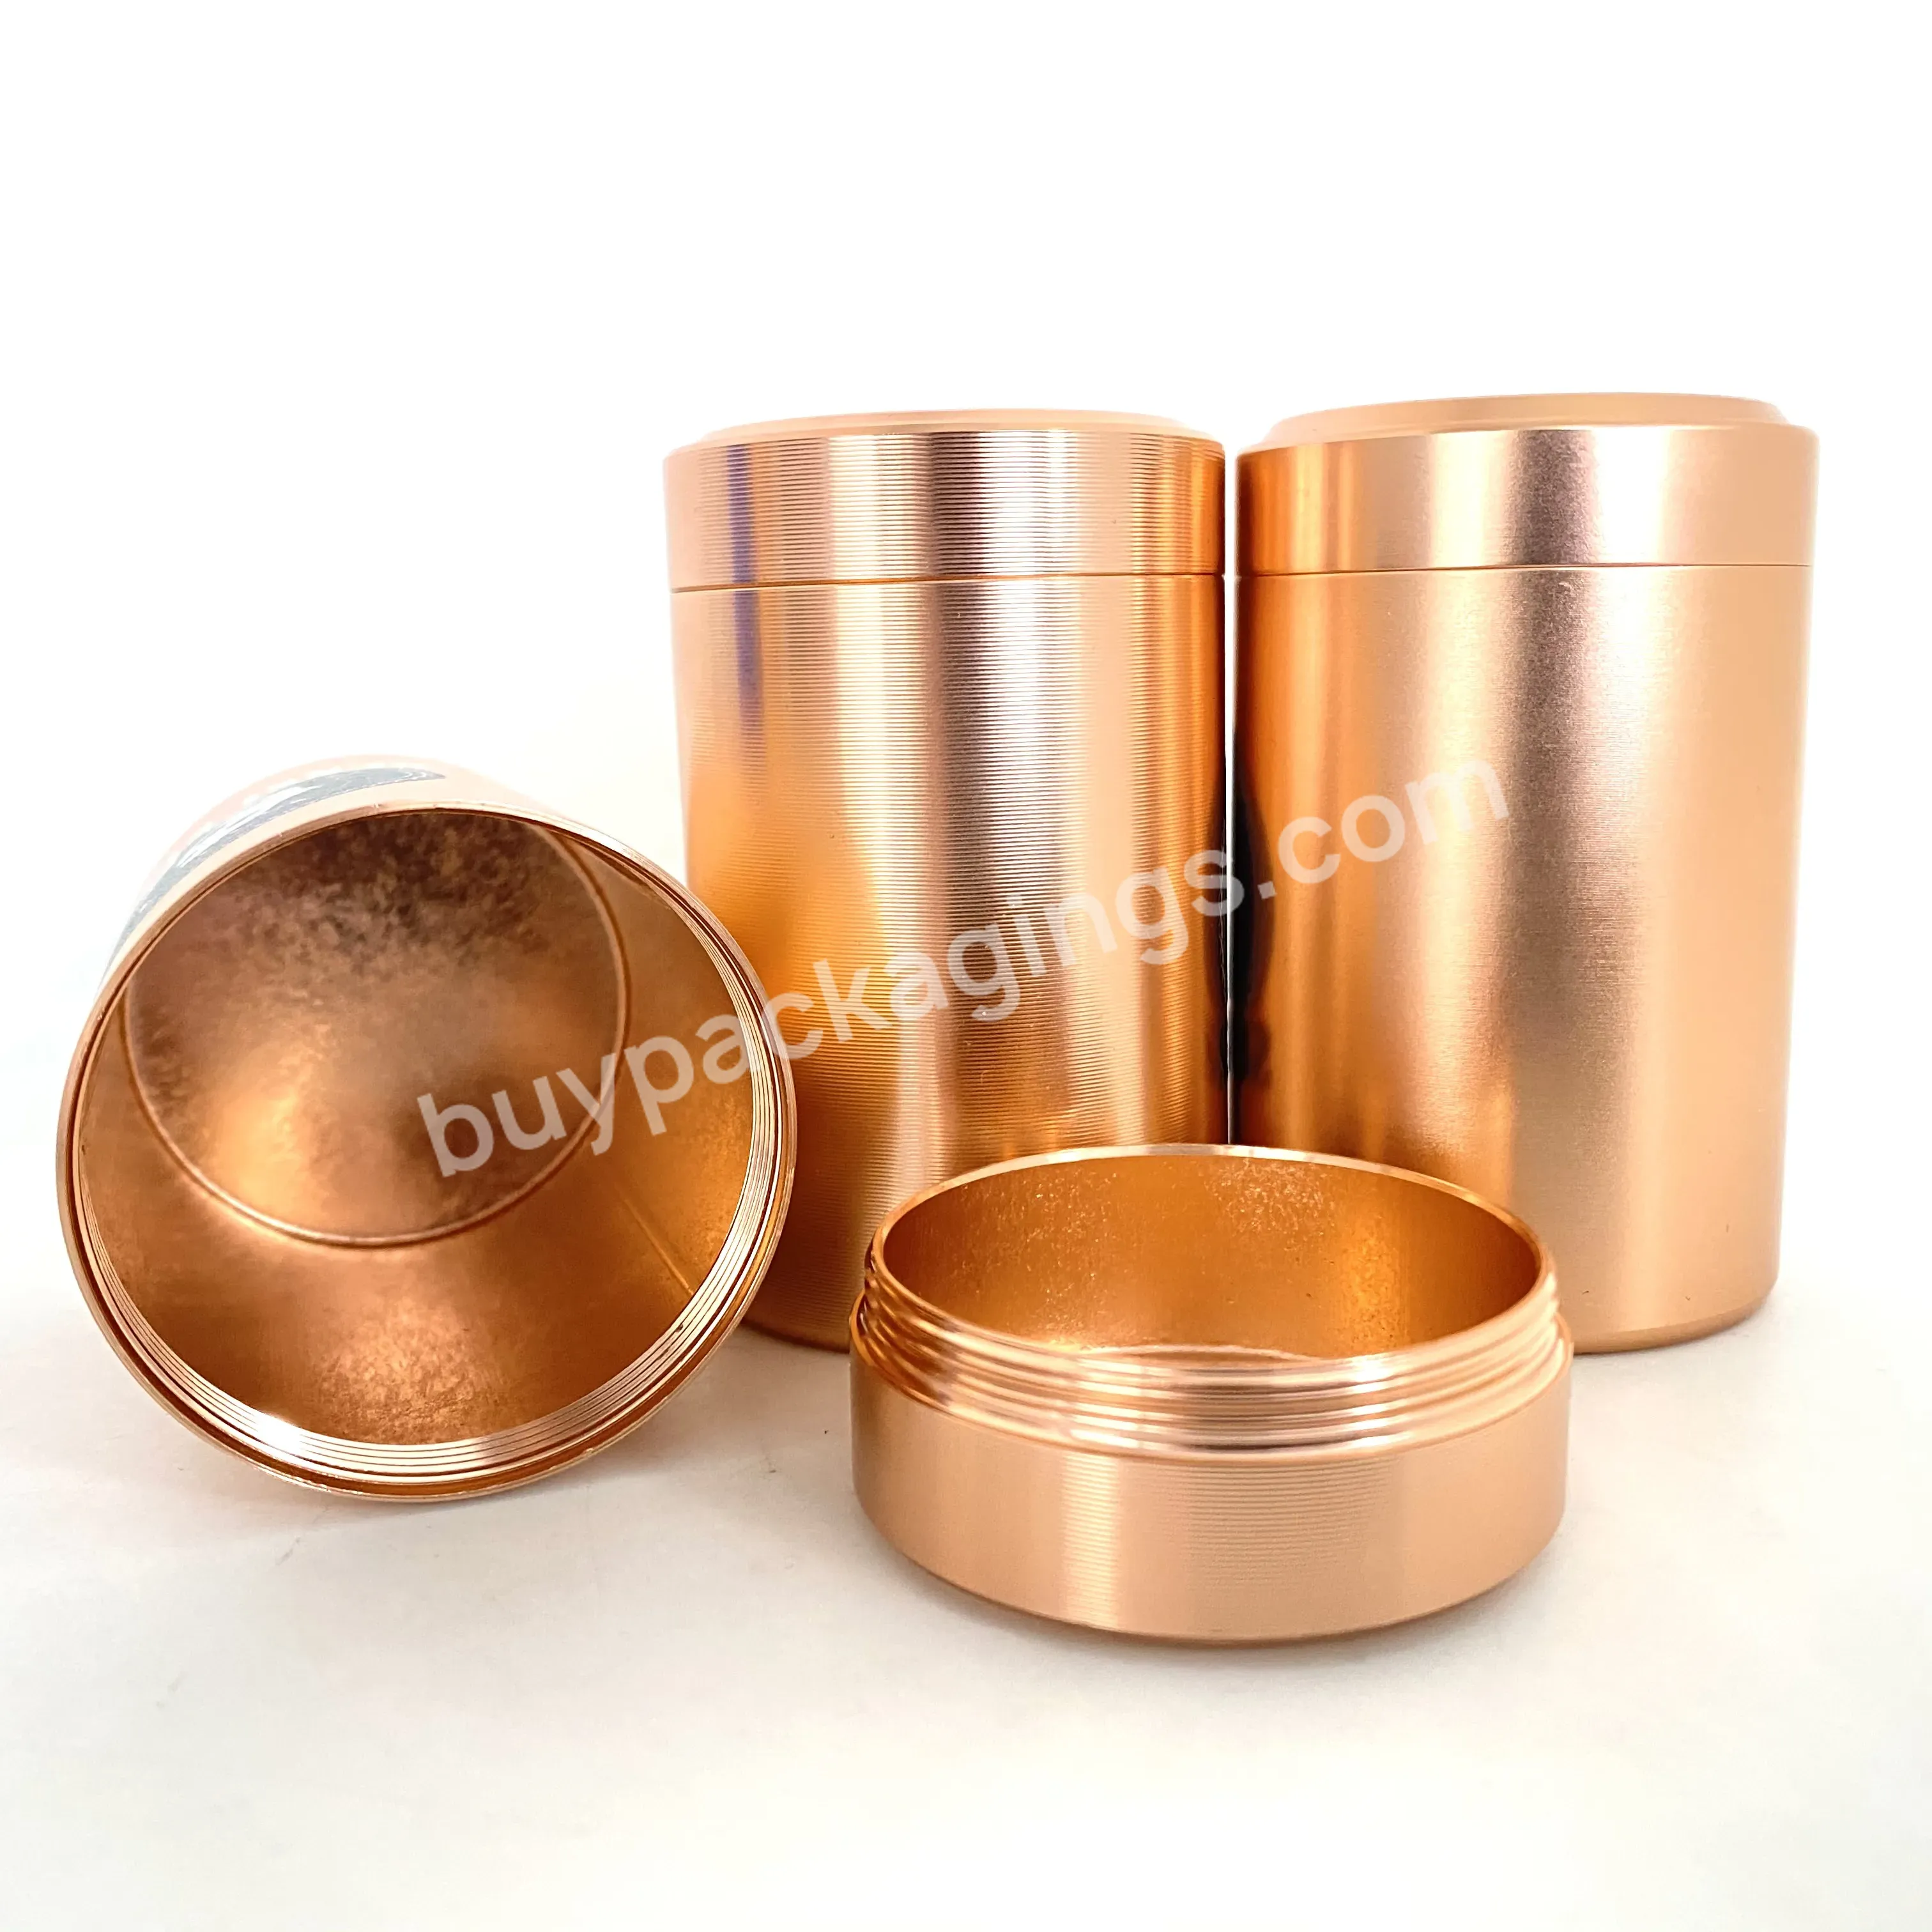 Small Mini Tall Round Metal Storage Tea Packaging Tin Box Can Container With Screw Lid Manufacturer - Buy Storage Tea Packaging Tin Box Can Container,Round Metal Tea Can With Screw Lid,Small Mini Tall Tea Jar Metal.